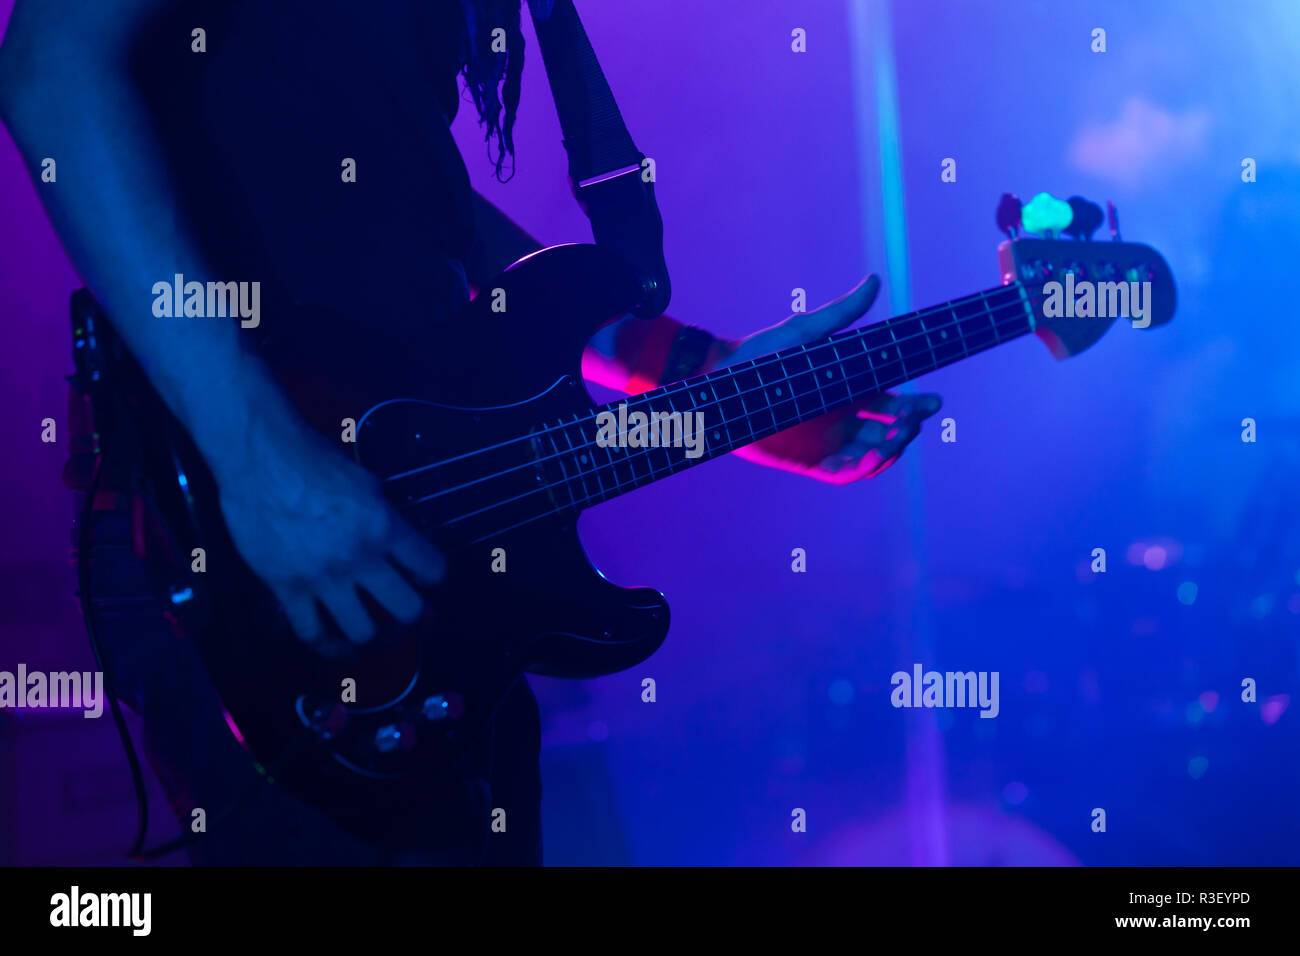 Live rock music background, bass guitar player on a stage, close-up photo with soft selective focus Stock Photo